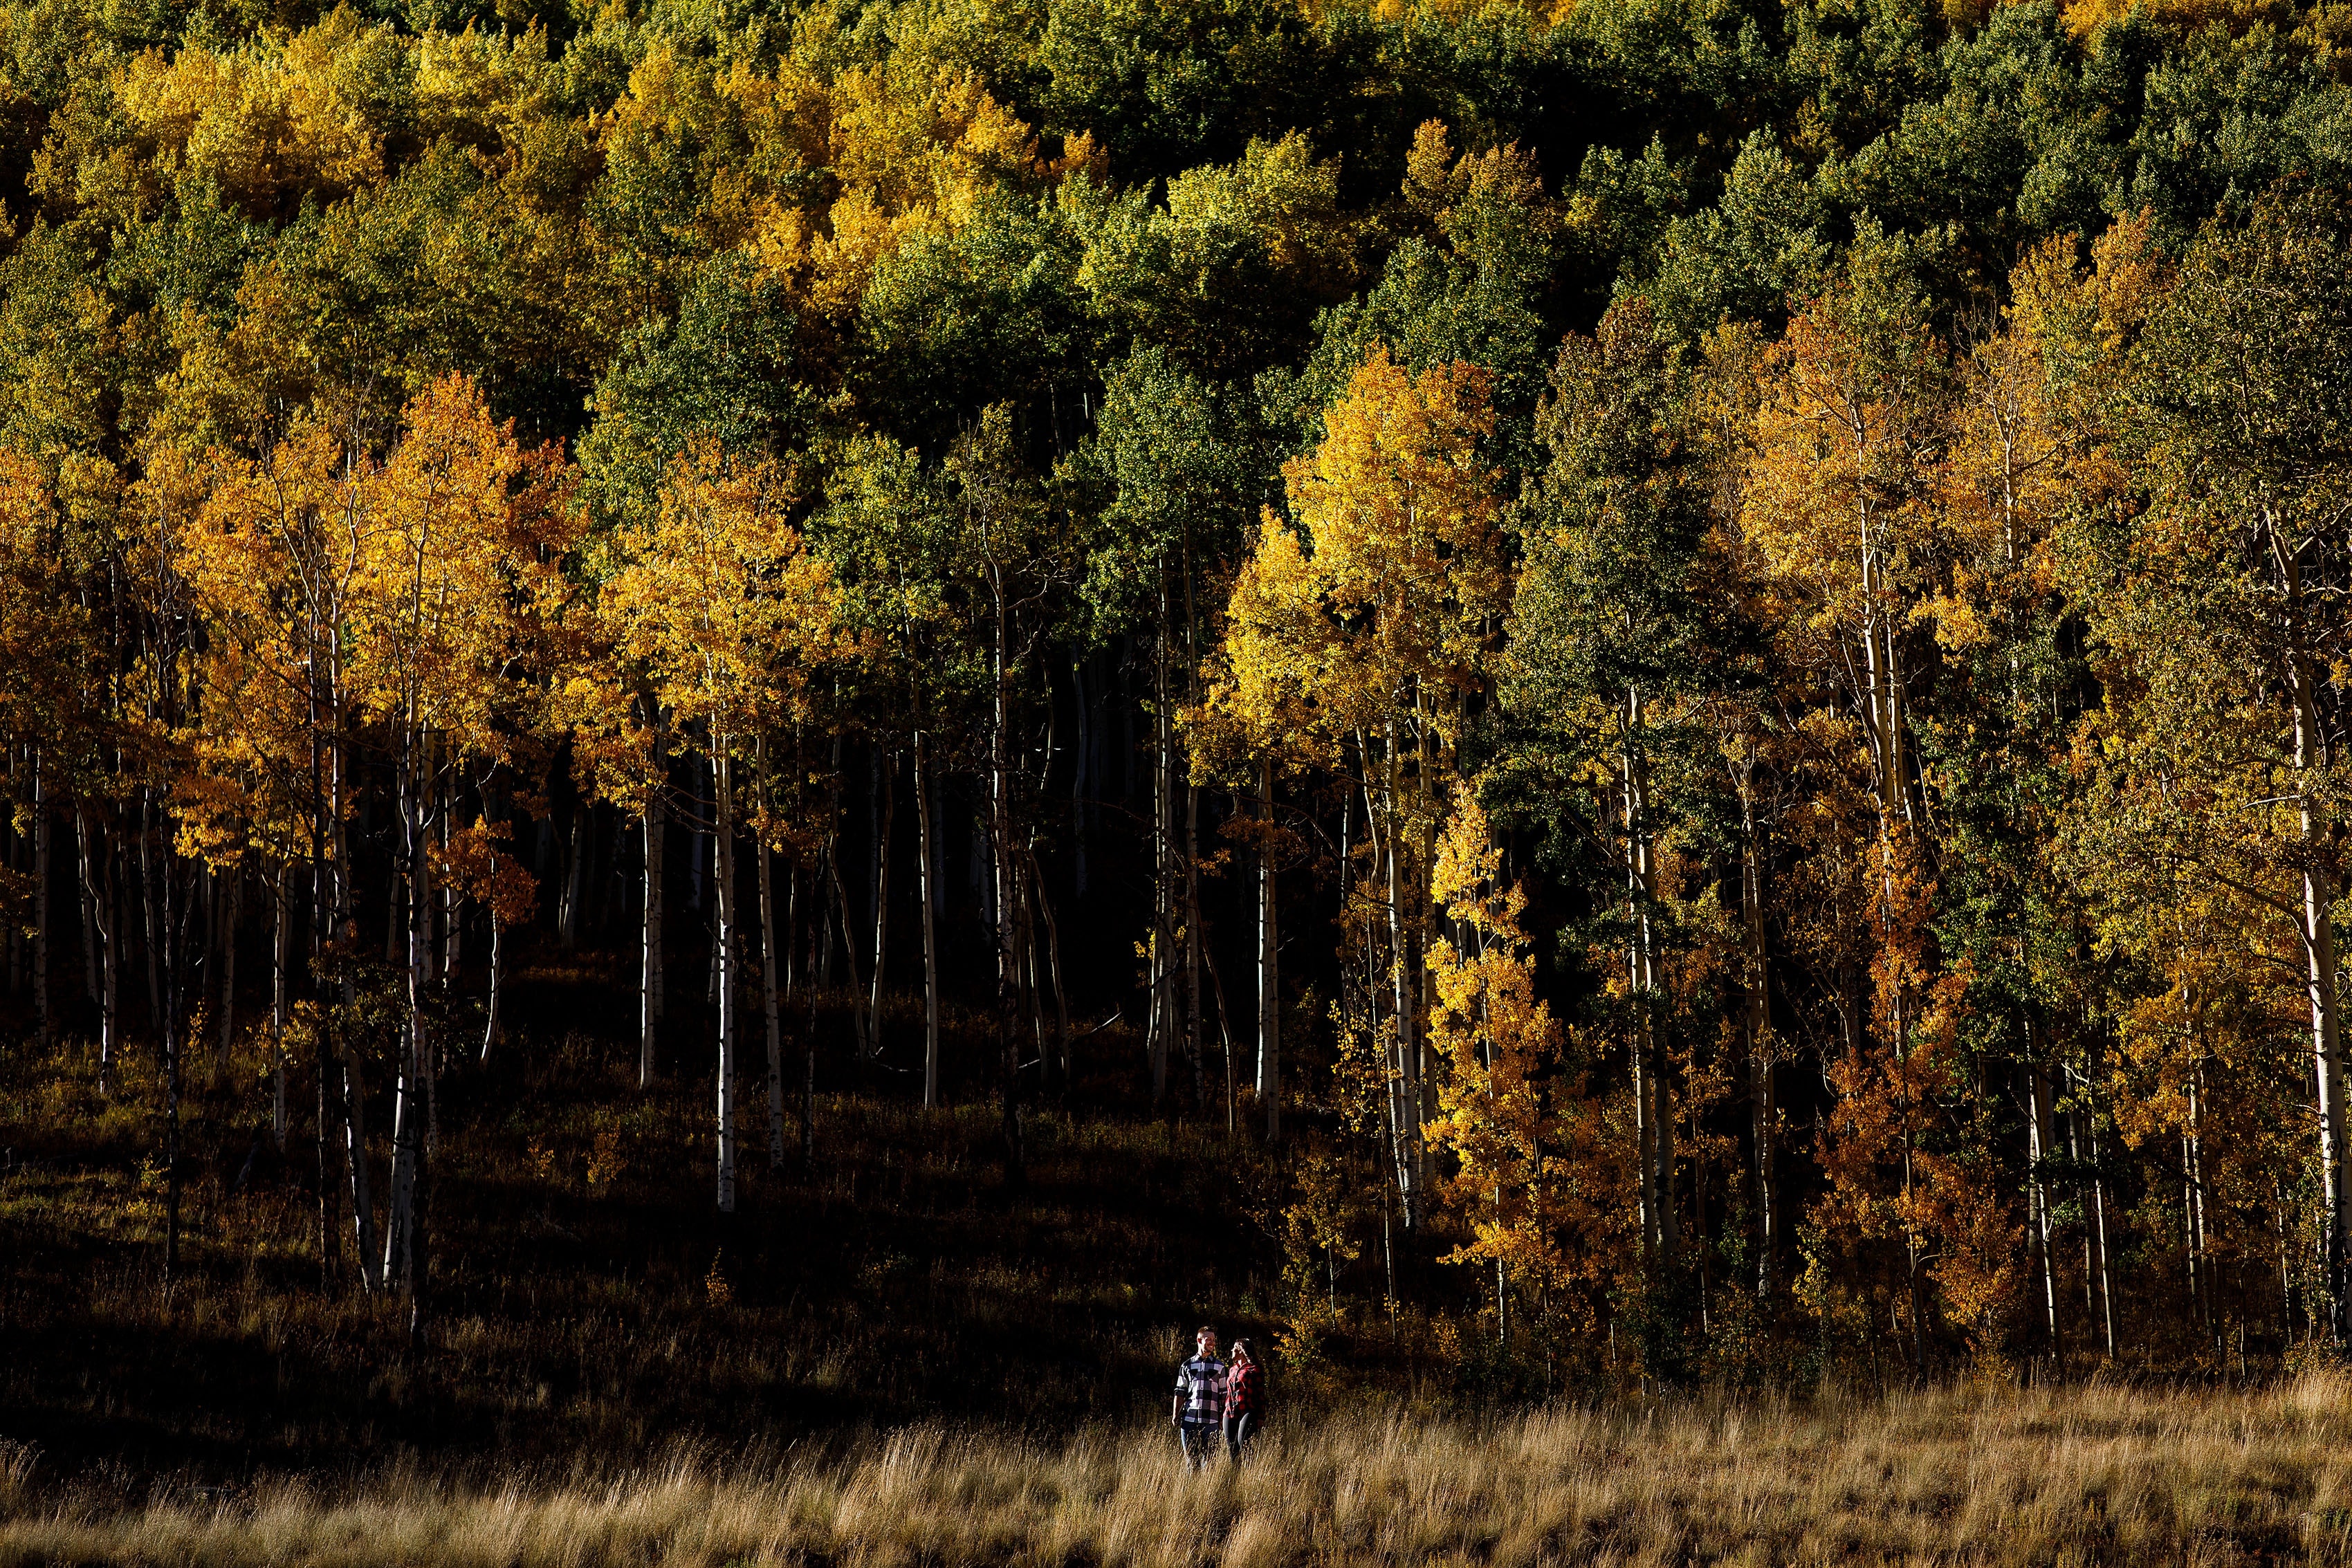 Caroline and Brendan walk together near a grove of colorful aspen trees at Piney River Ranch